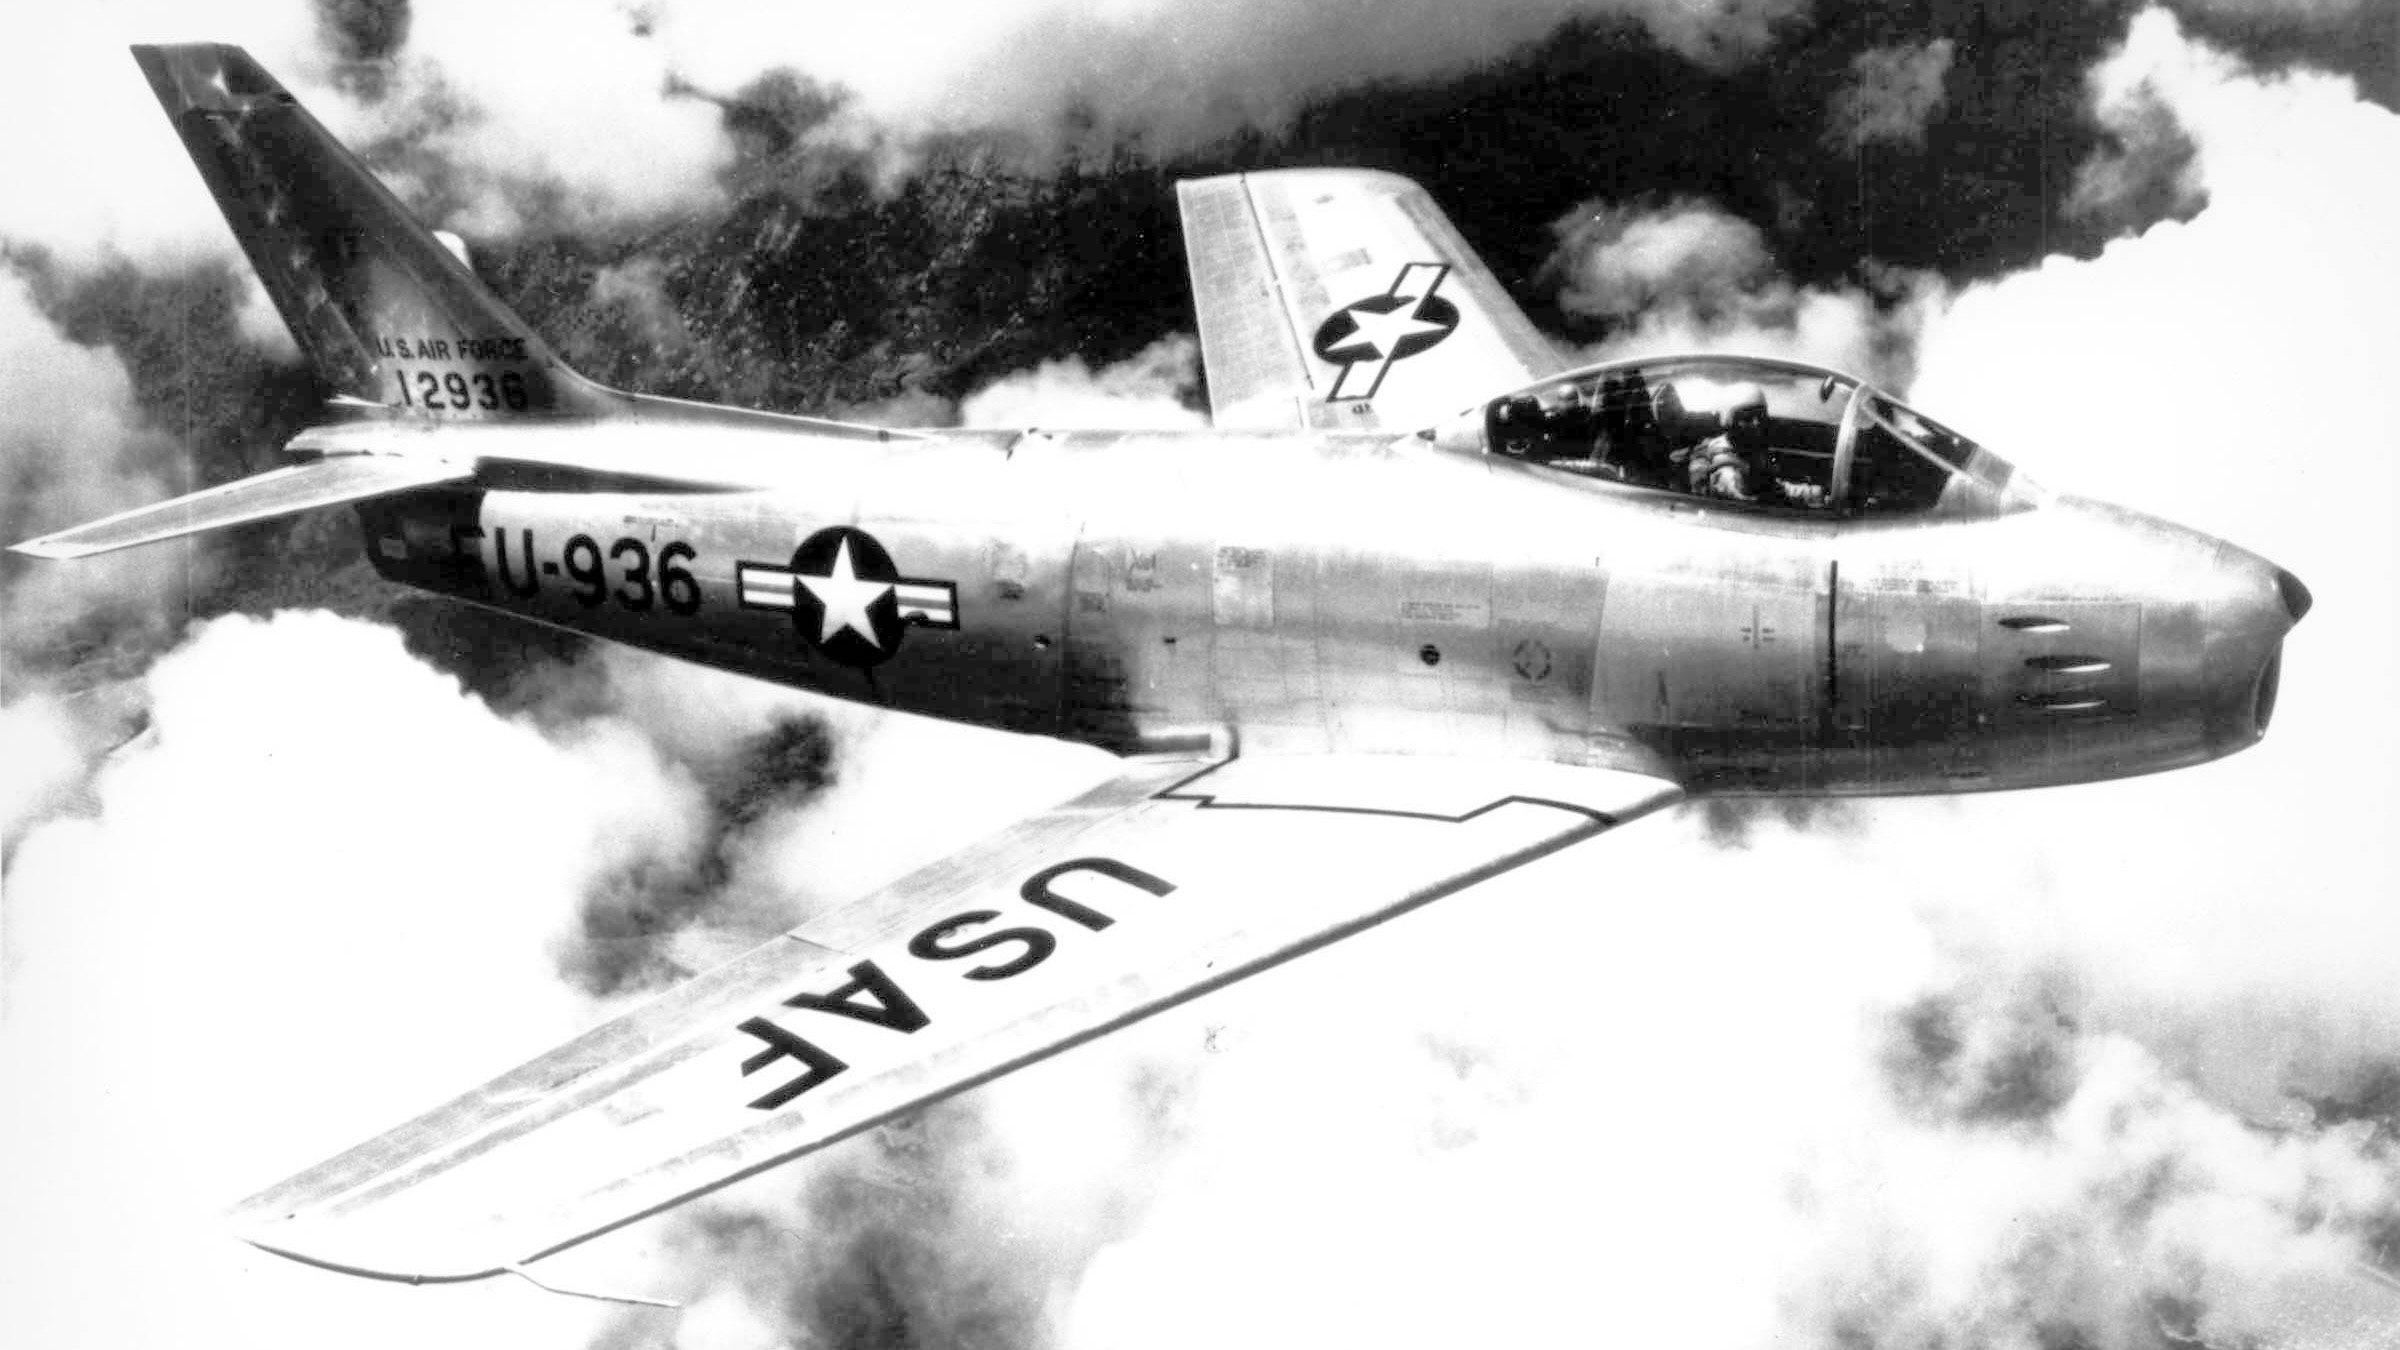 The F-86 , the USAF's first swept-wing jet fighter